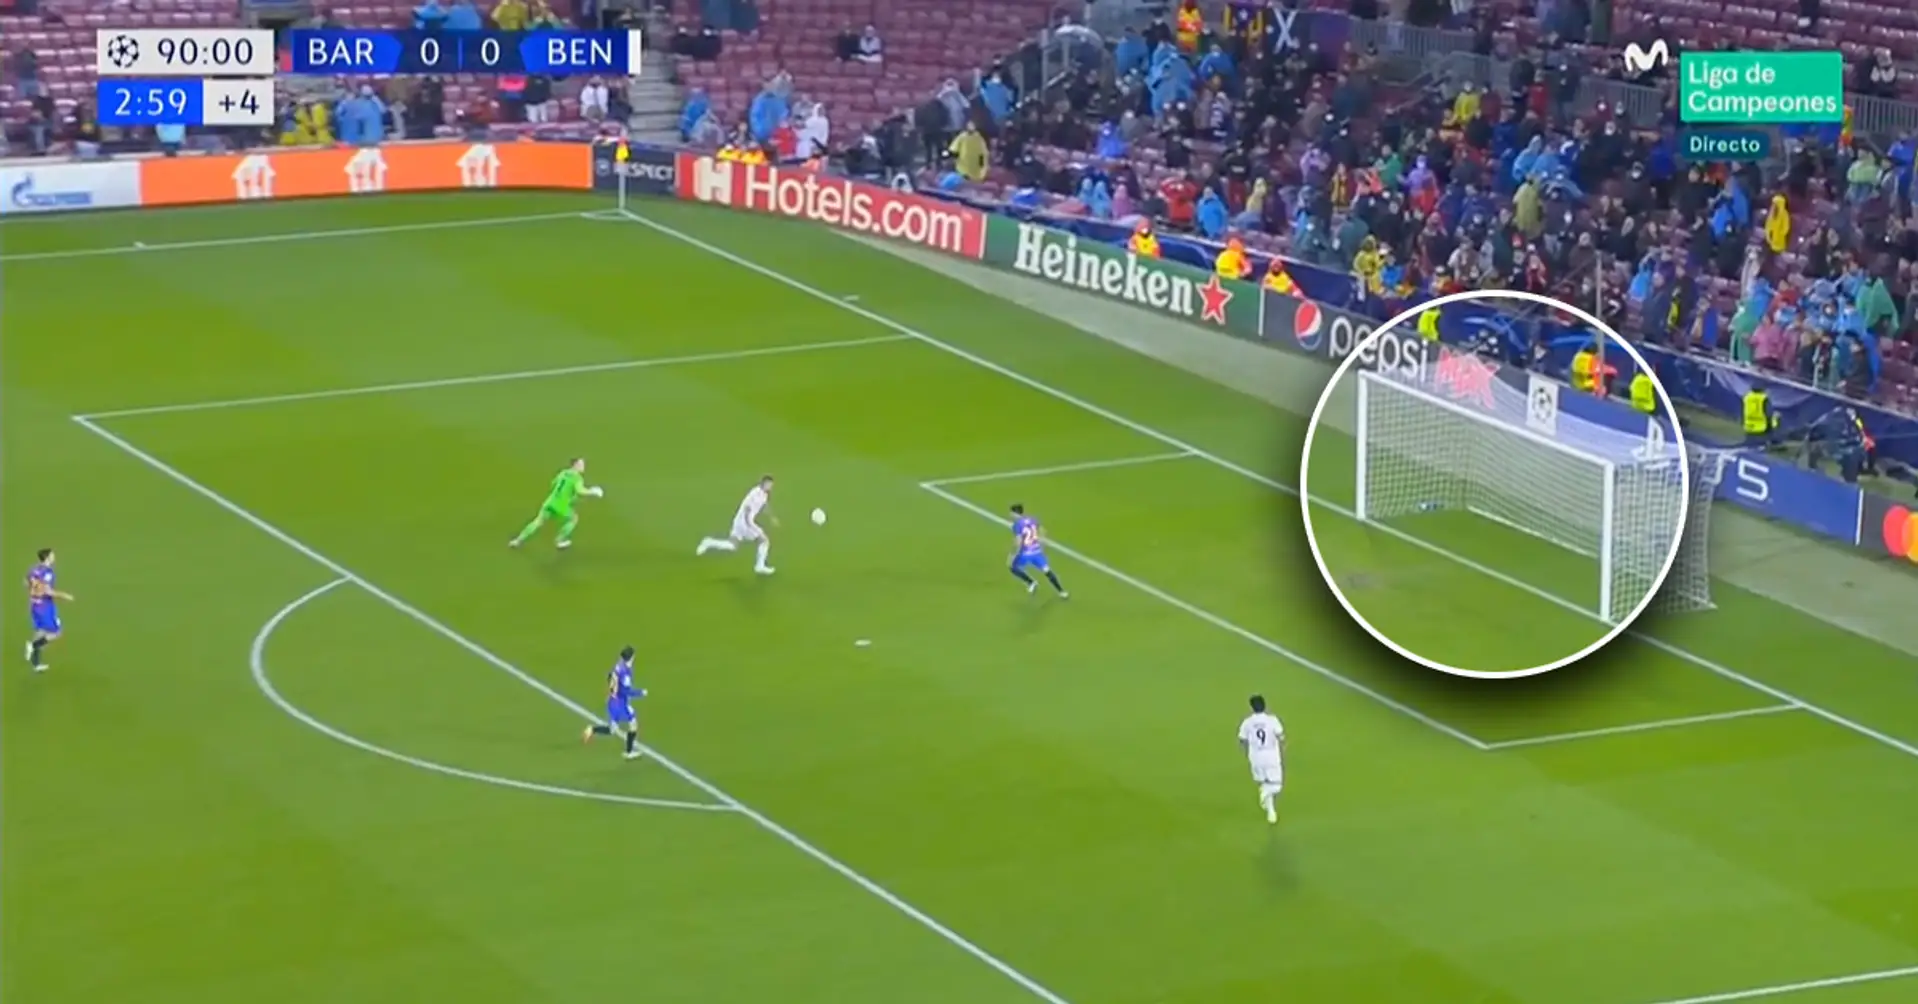 WHAT? Benfica striker’s shocking miss vs FC Barcelona in the last minutes of the match